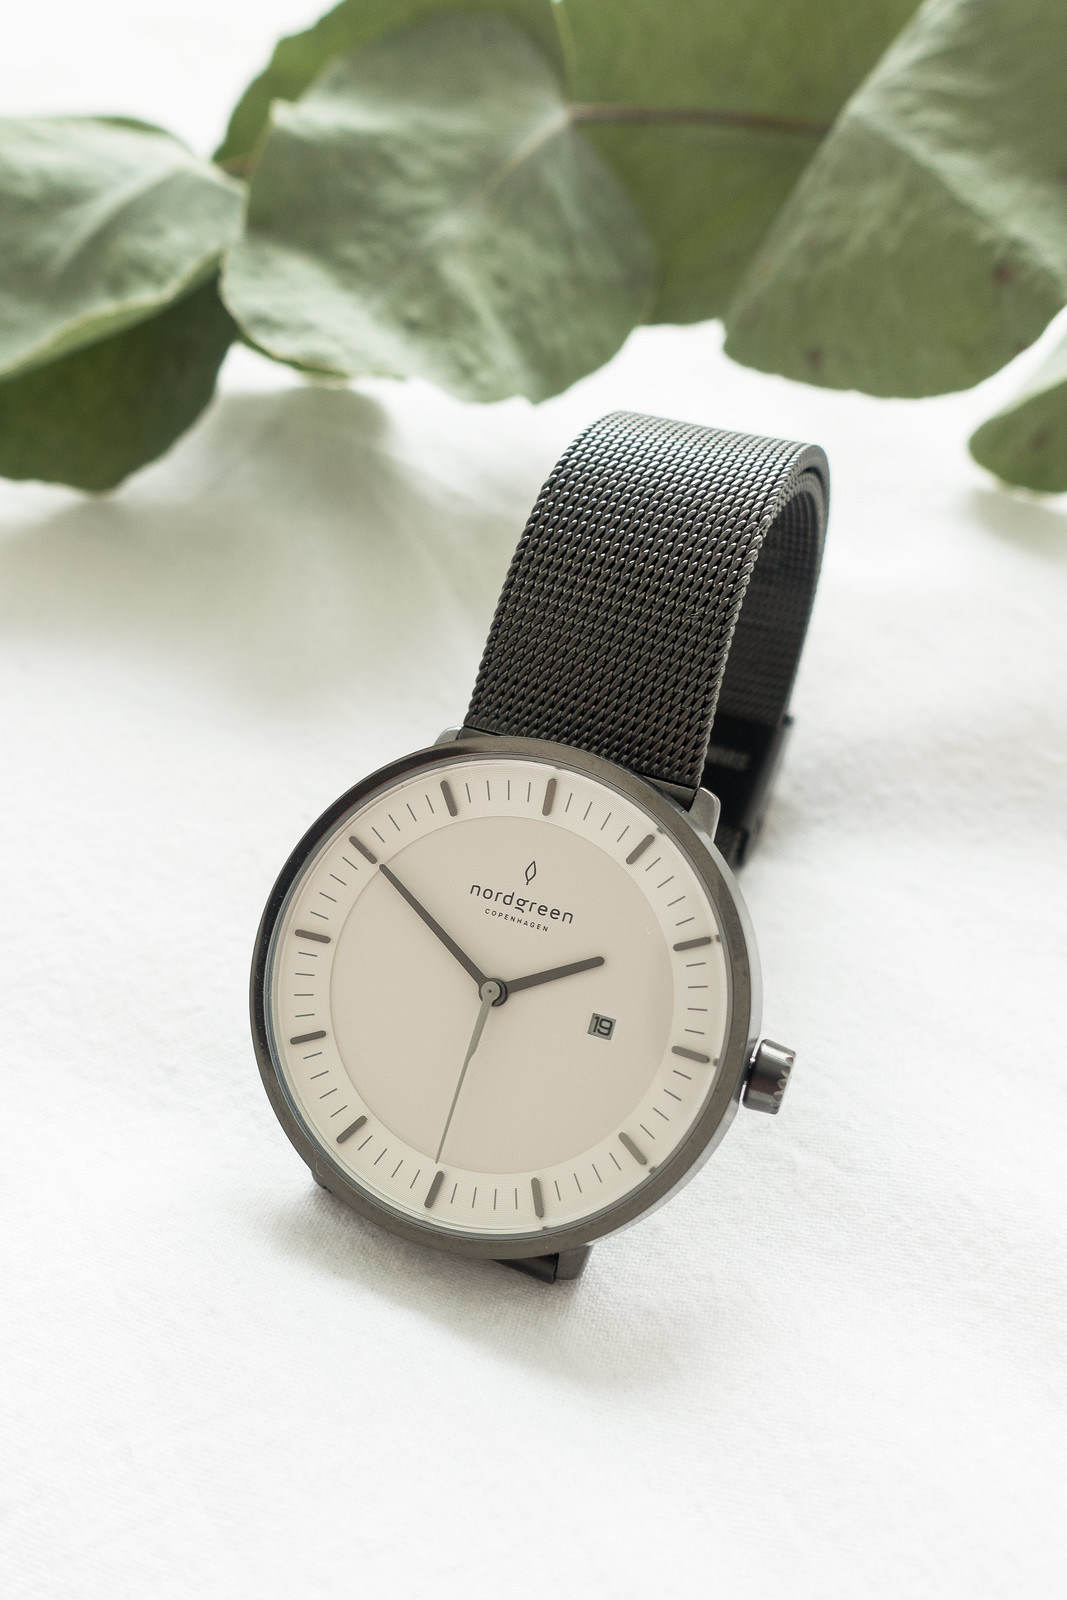 Choosing A Quality Watch With Nordgreen